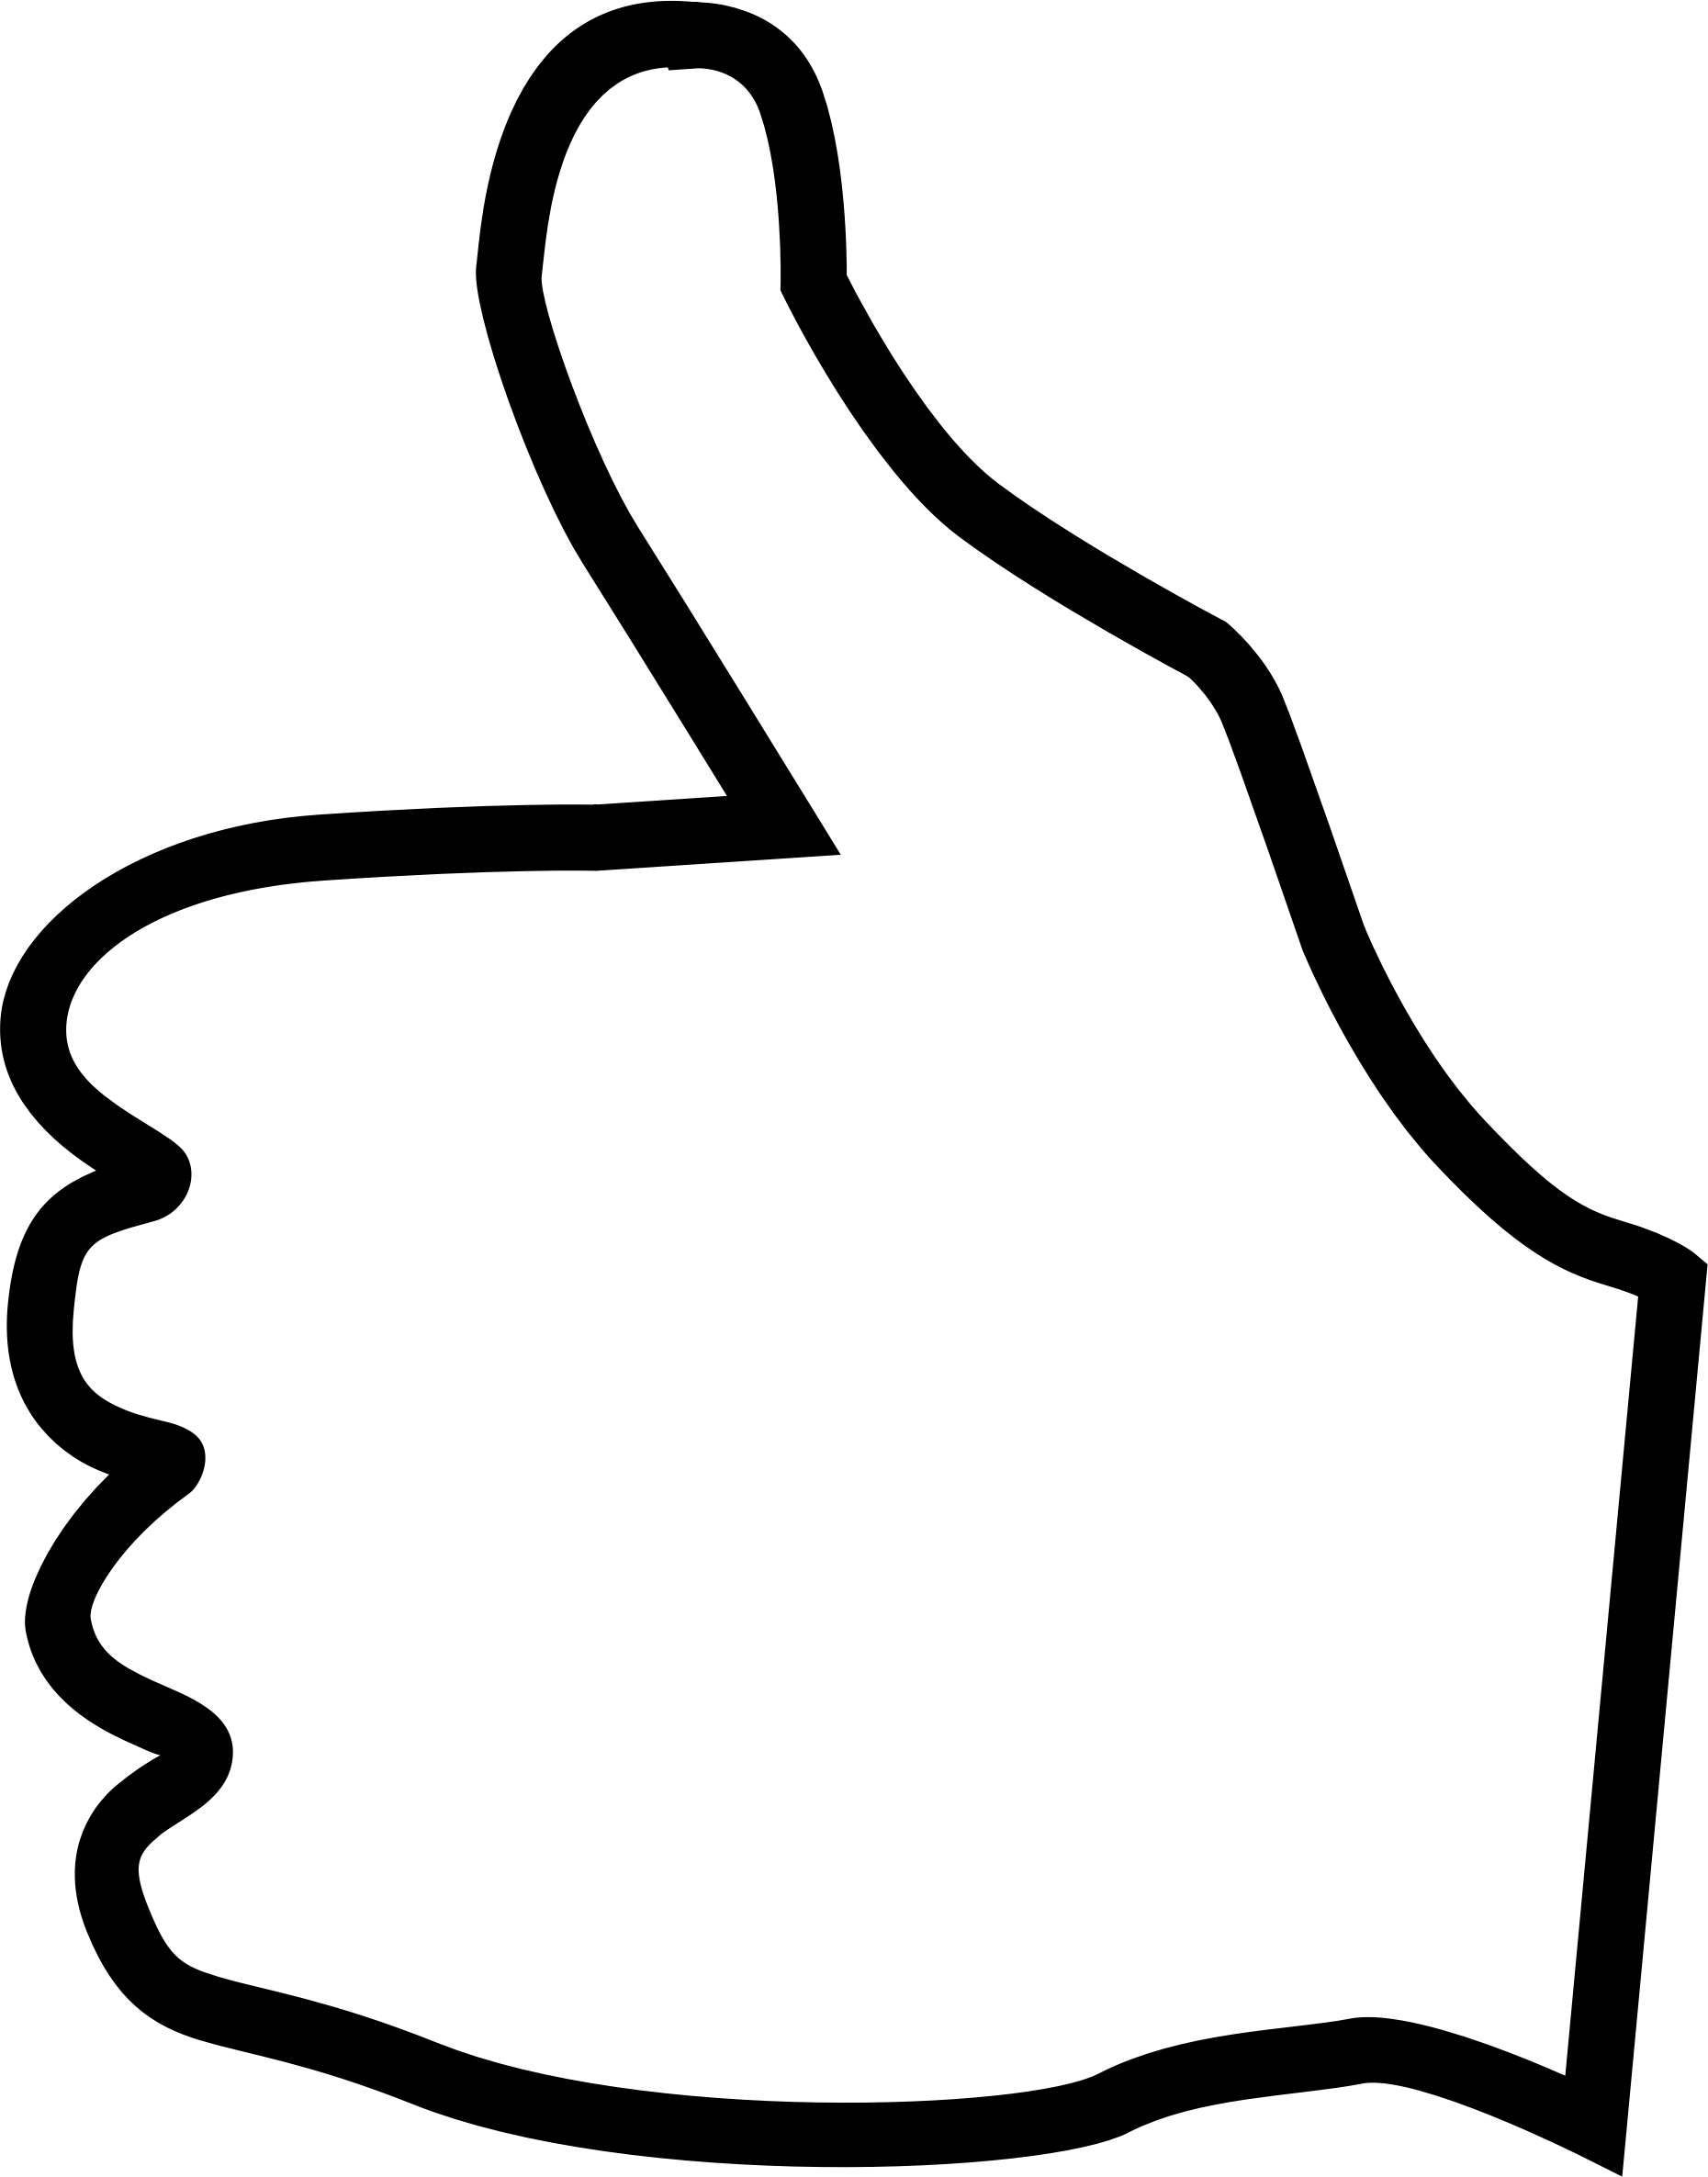 microsoft clipart thumbs up - photo #16